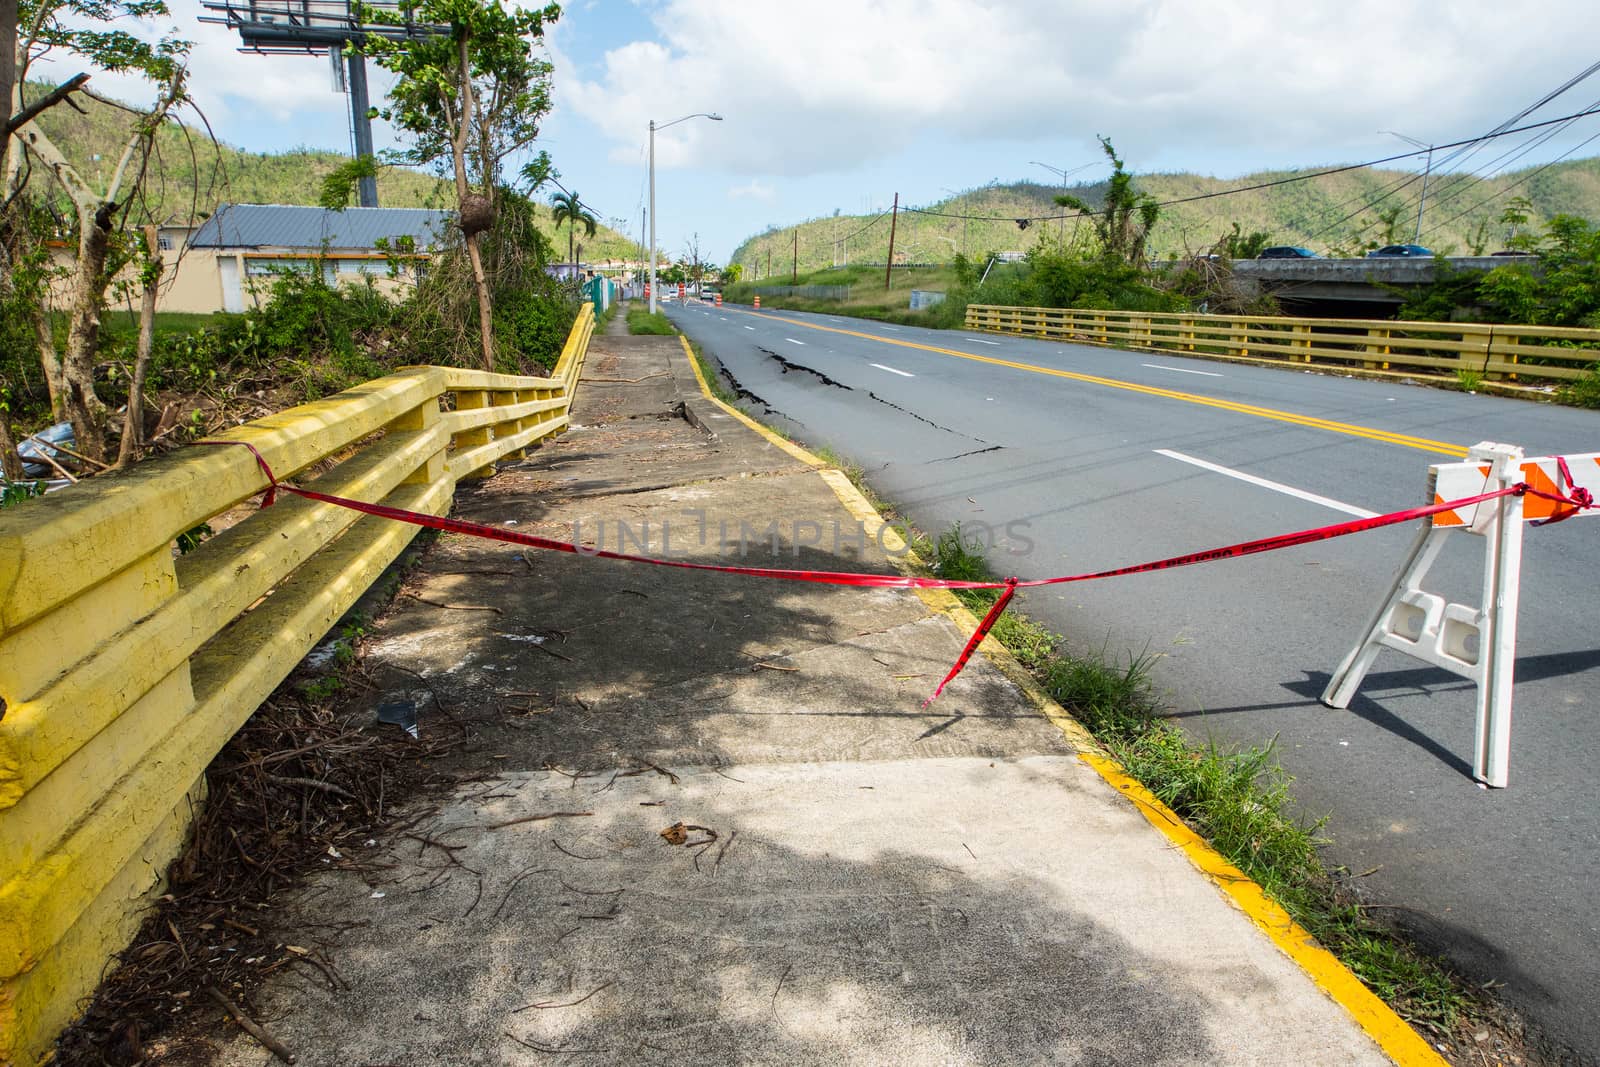 Bridge collapse in Caguas, Puerto Rico from Hurrican Maria flooding